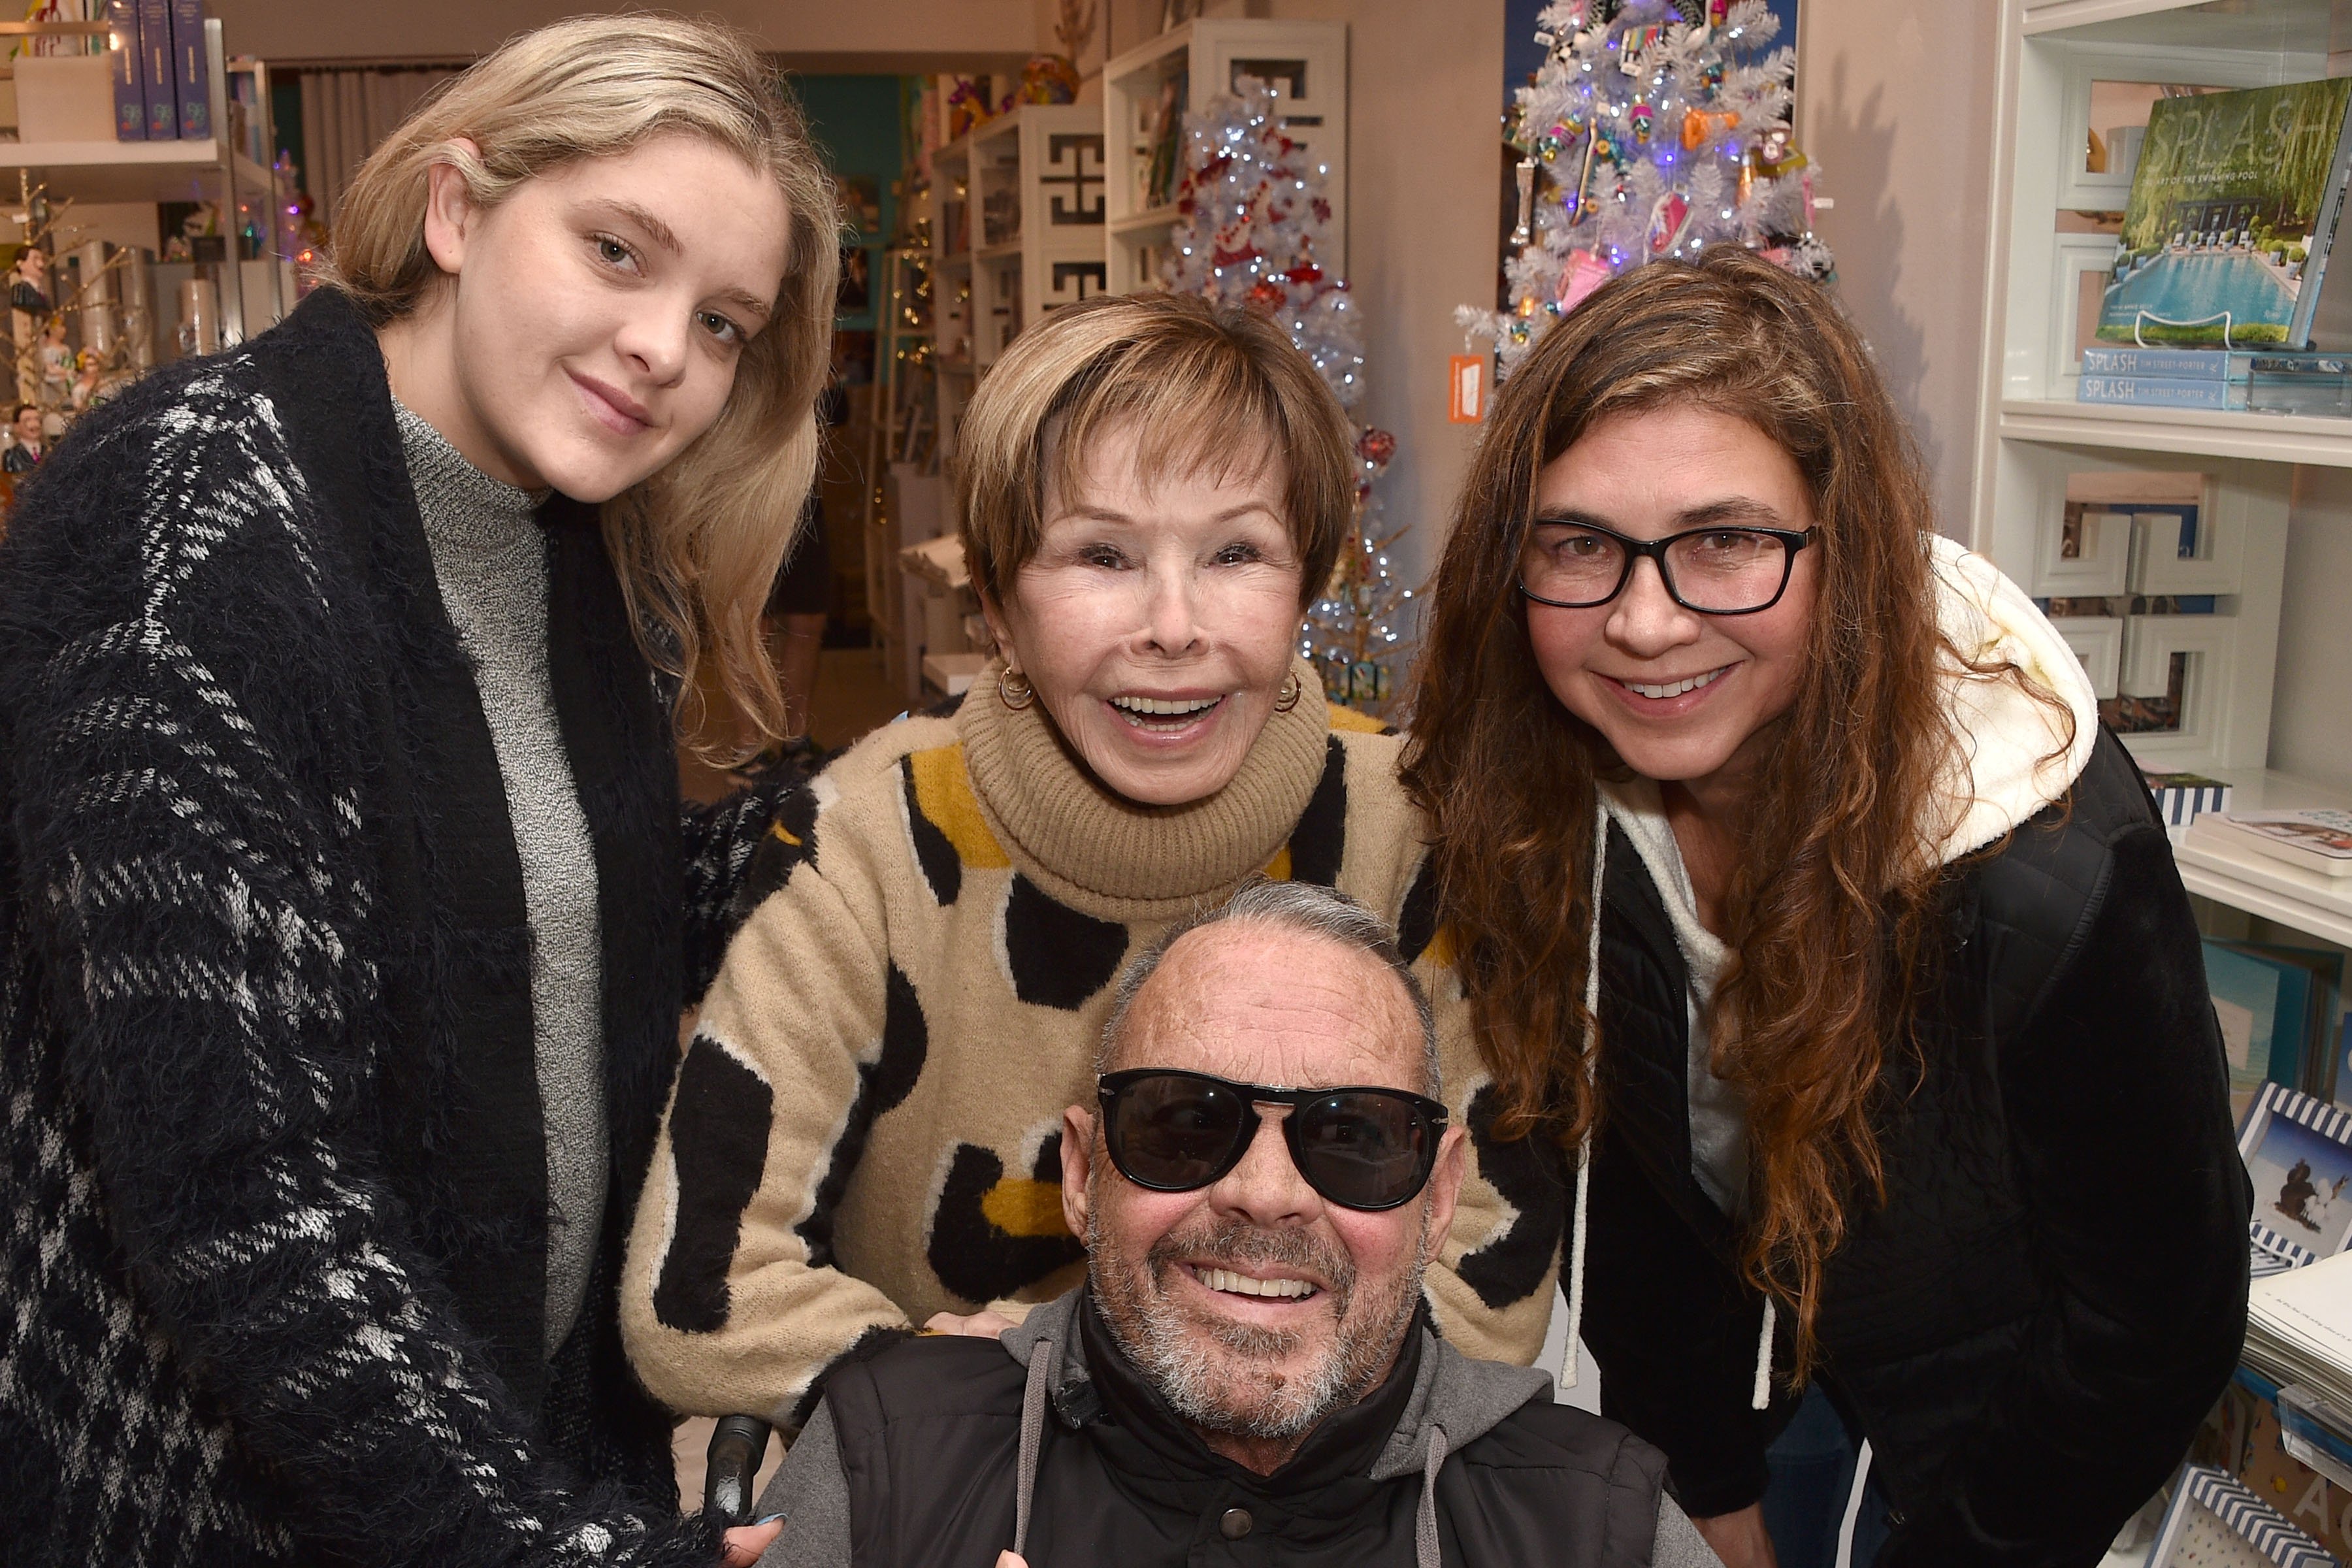 Madison Neile McQueen, Chad McQueen, Neile Adams McQueen, and a guest at Neile Adams McQueen's book signing at Just Fabulous Palm Springs on December 11, 2022, in Palm Springs, California | Source: Getty Images